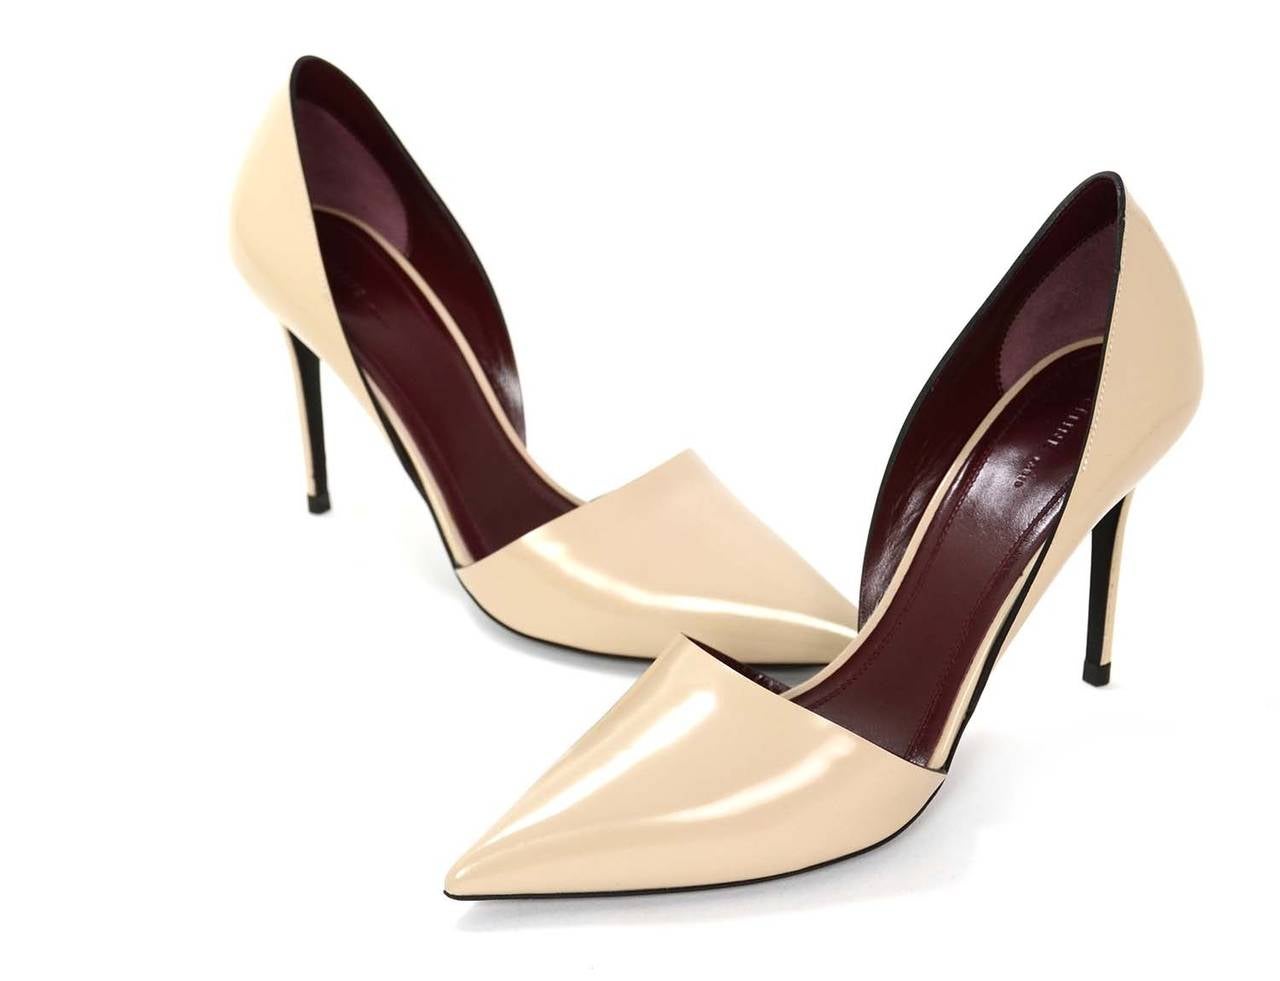 Women's or Men's CELINE New Nude Glazed Leather Pointed Toe Pumps